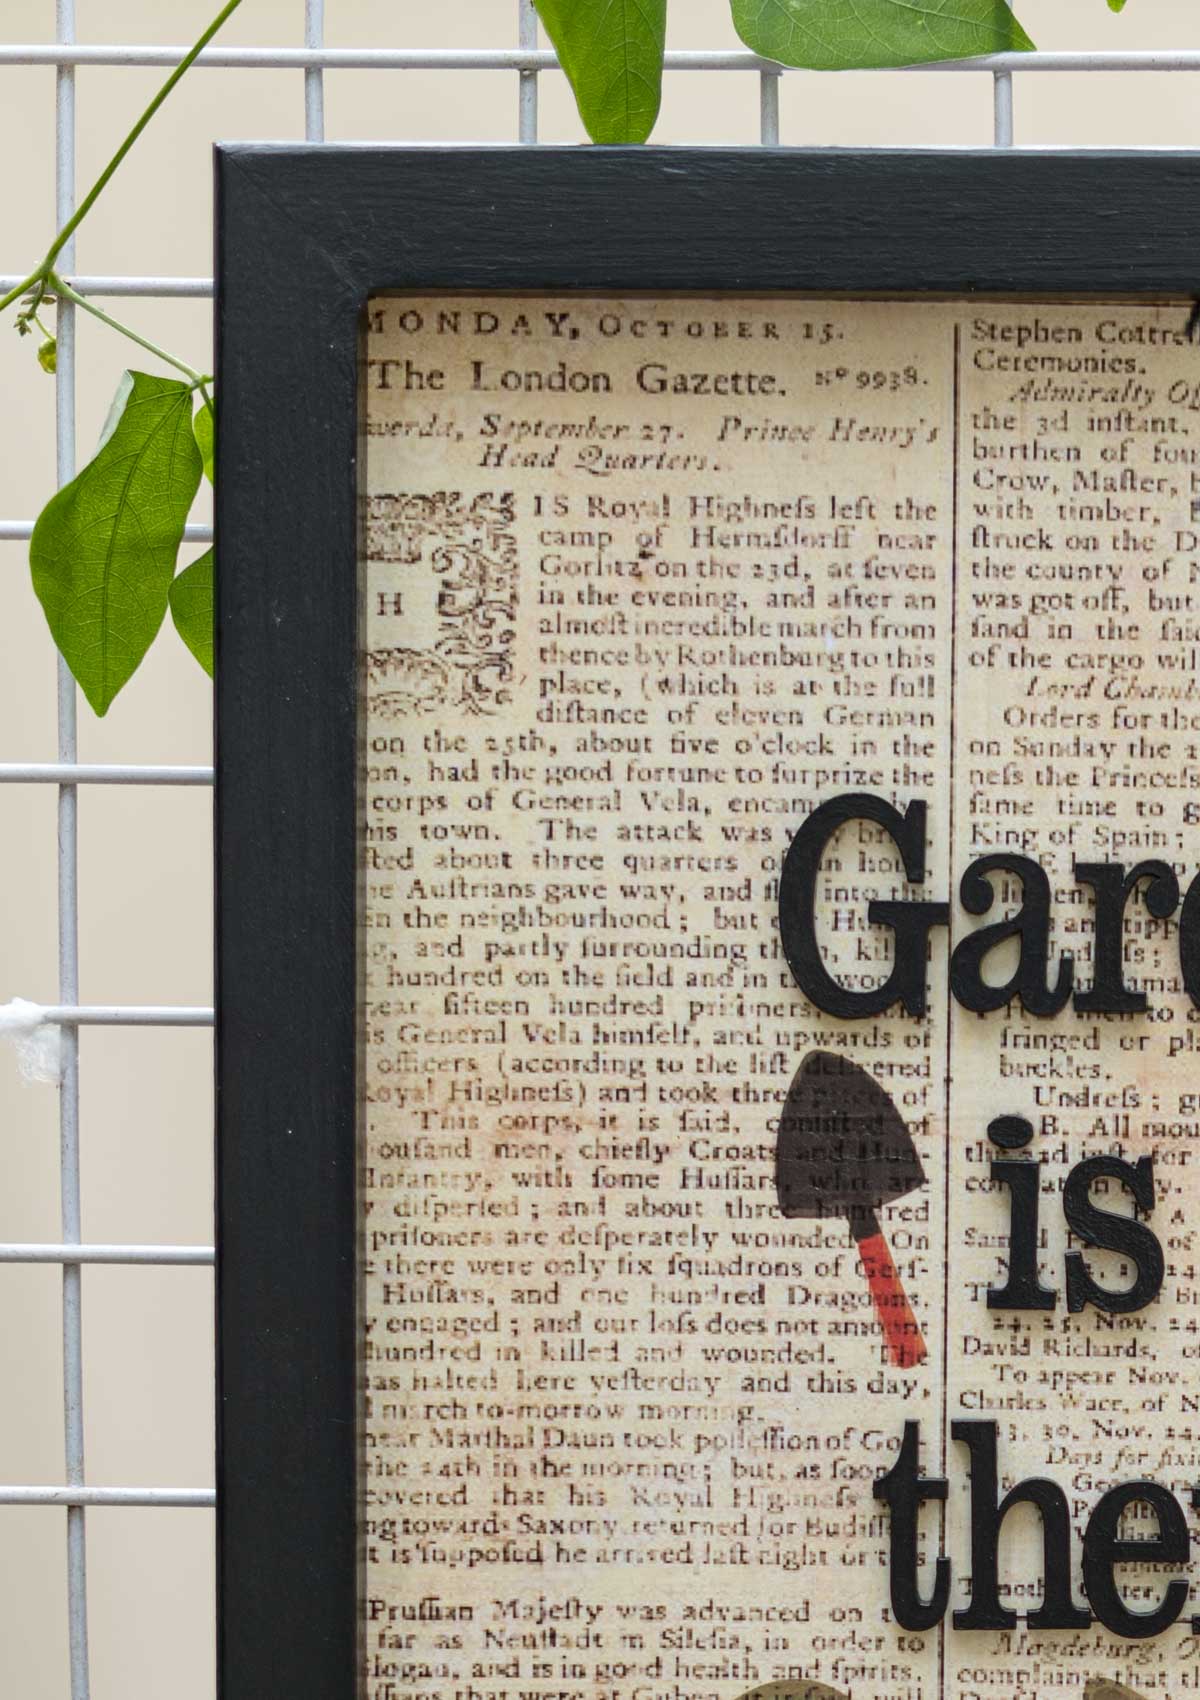 Garden Therapy Wall Frame